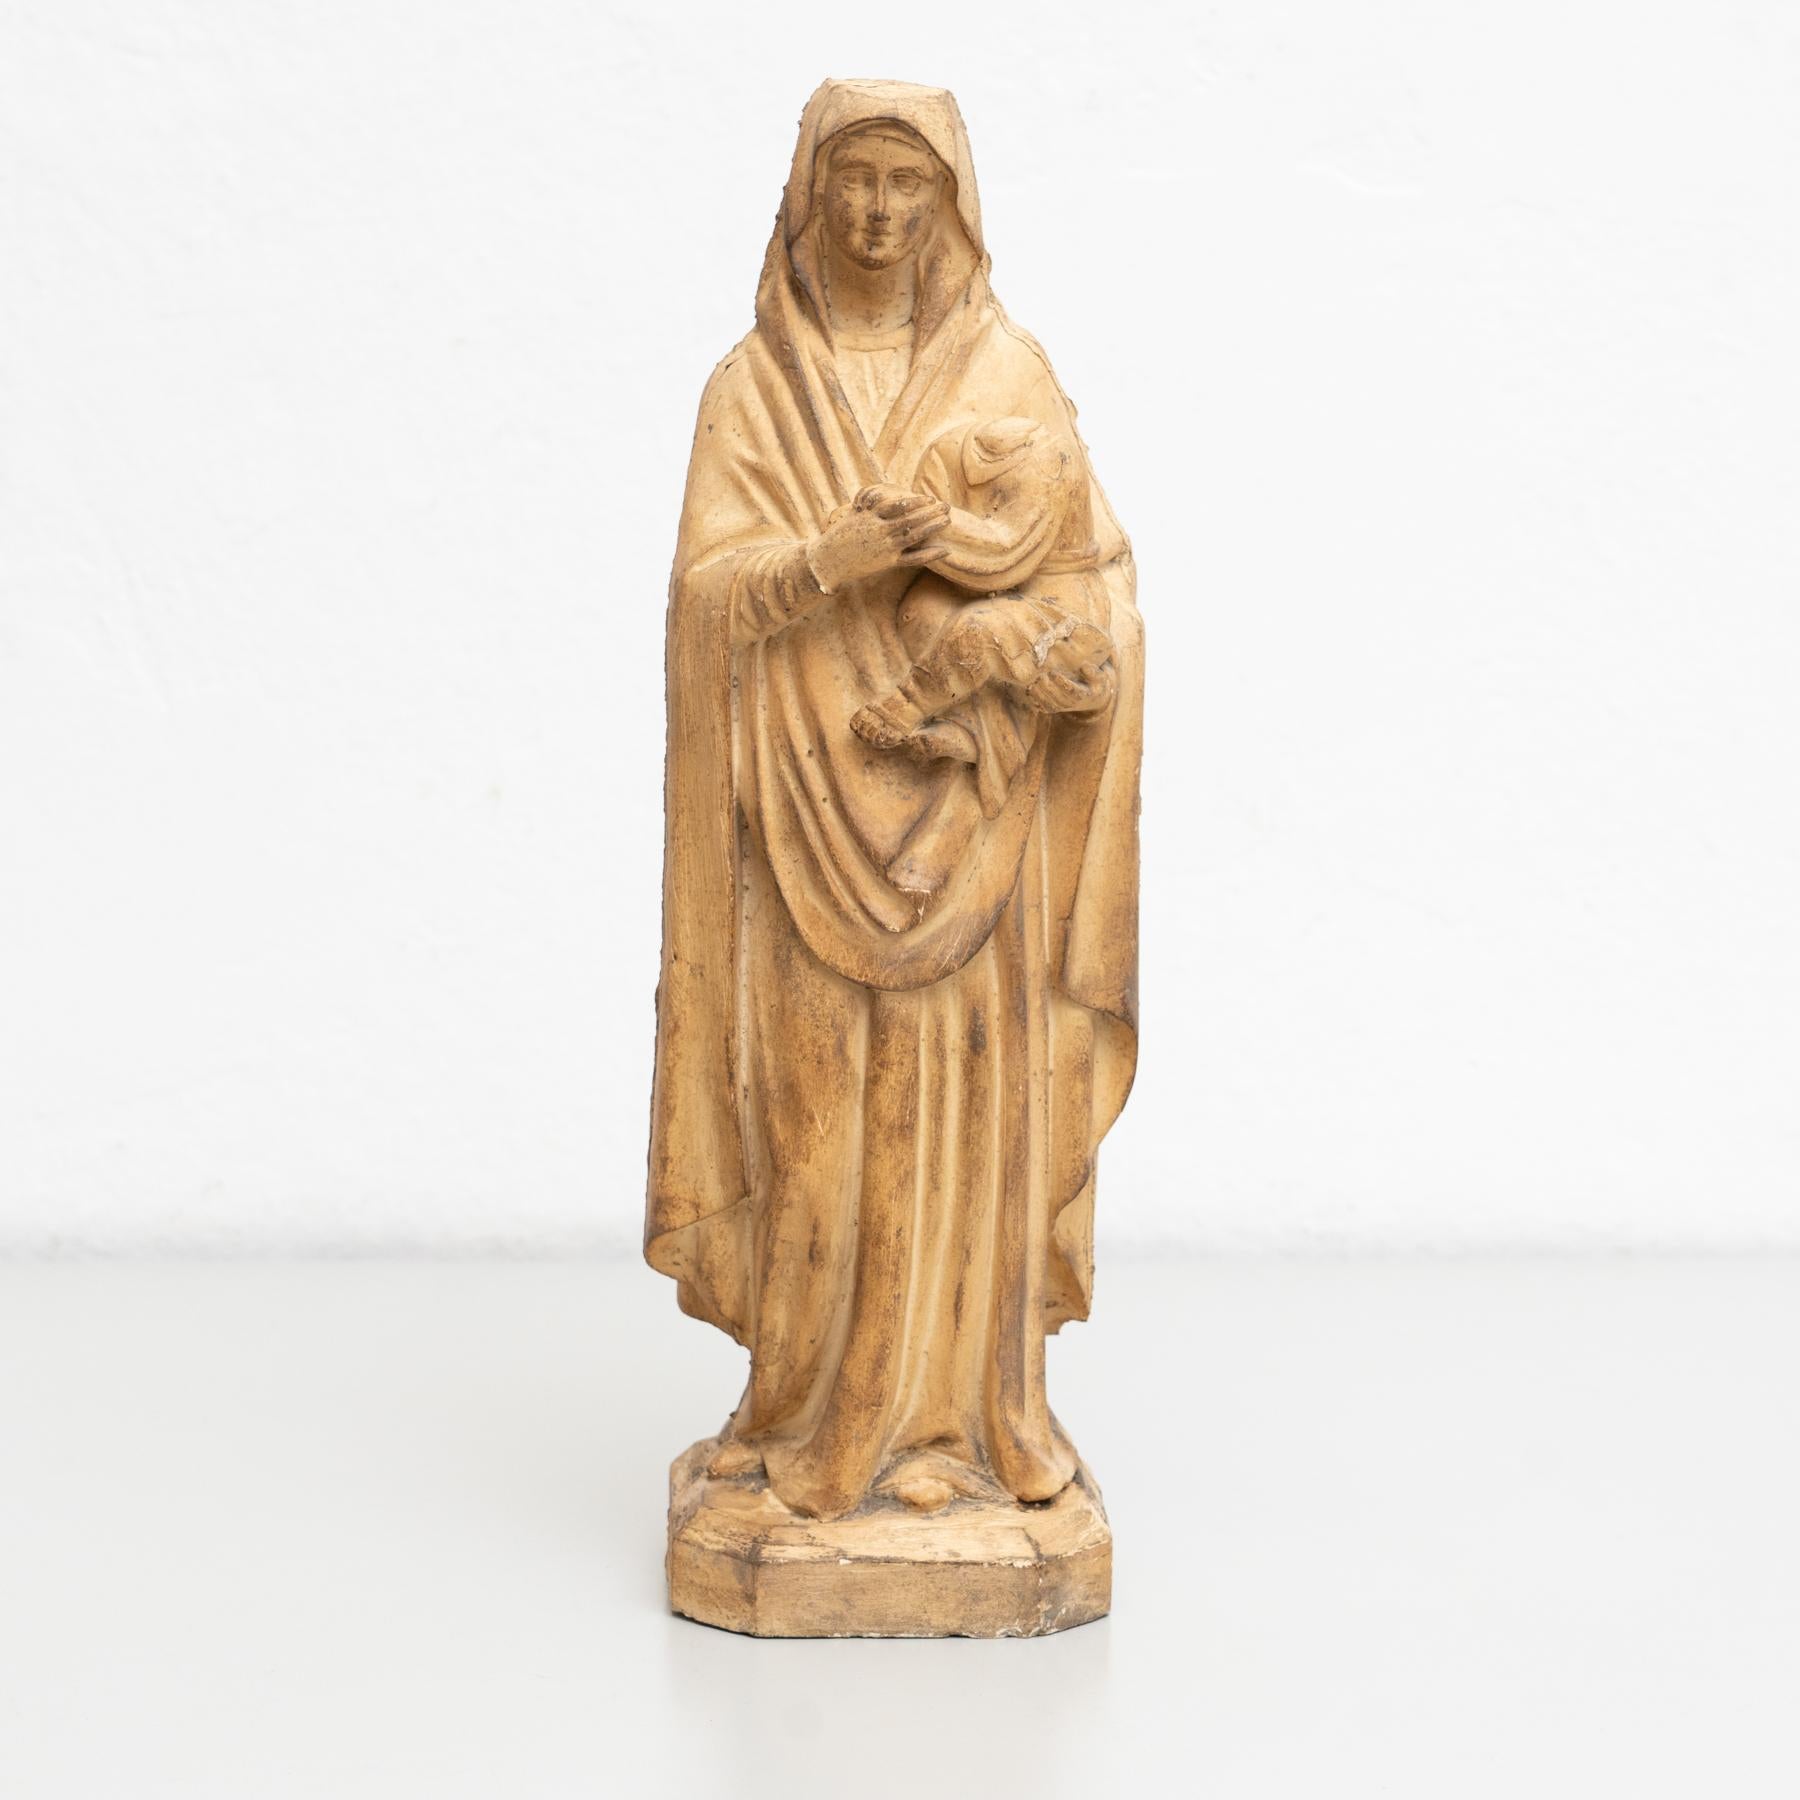 Traditional religious plaster figure of a virgin.

Made in traditional Catalan atelier in Olot, Spain, circa 1950.

In original condition, with minor wear consistent with age and use, preserving a beautiful patina.

Materials:
Plaster.
    